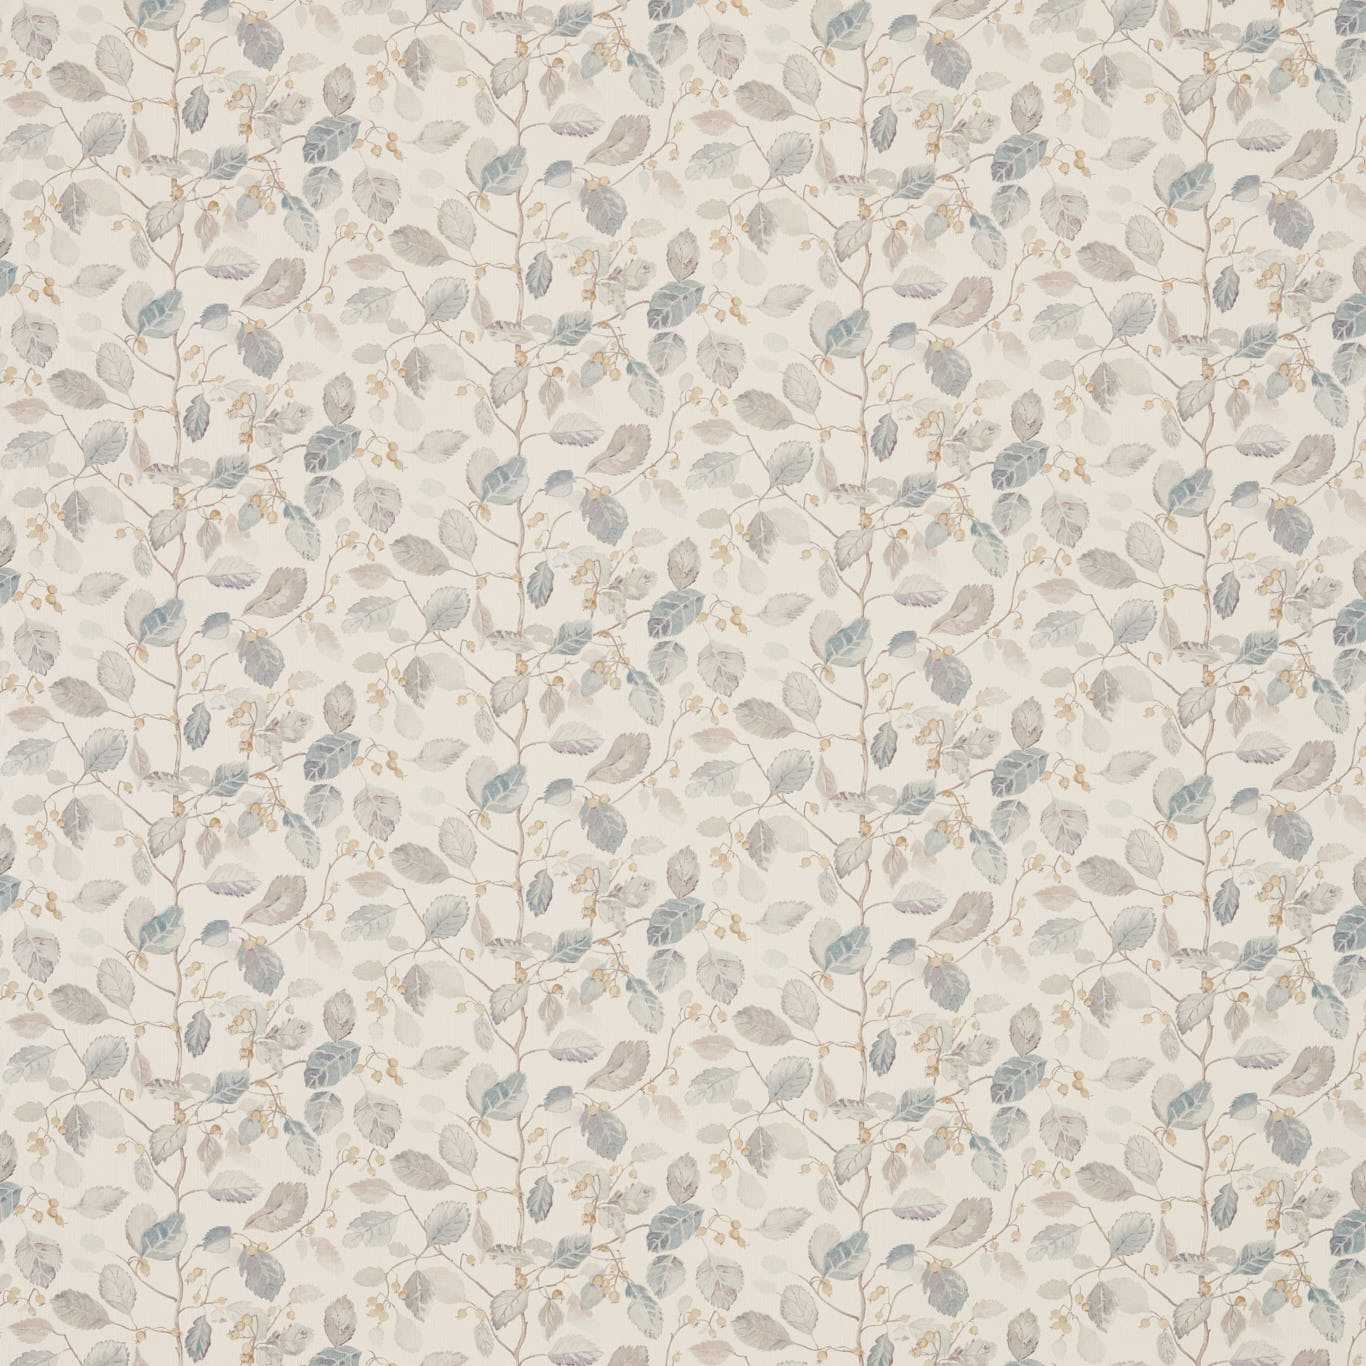 Woodland Berries Grey/Silver Fabric By Sanderson